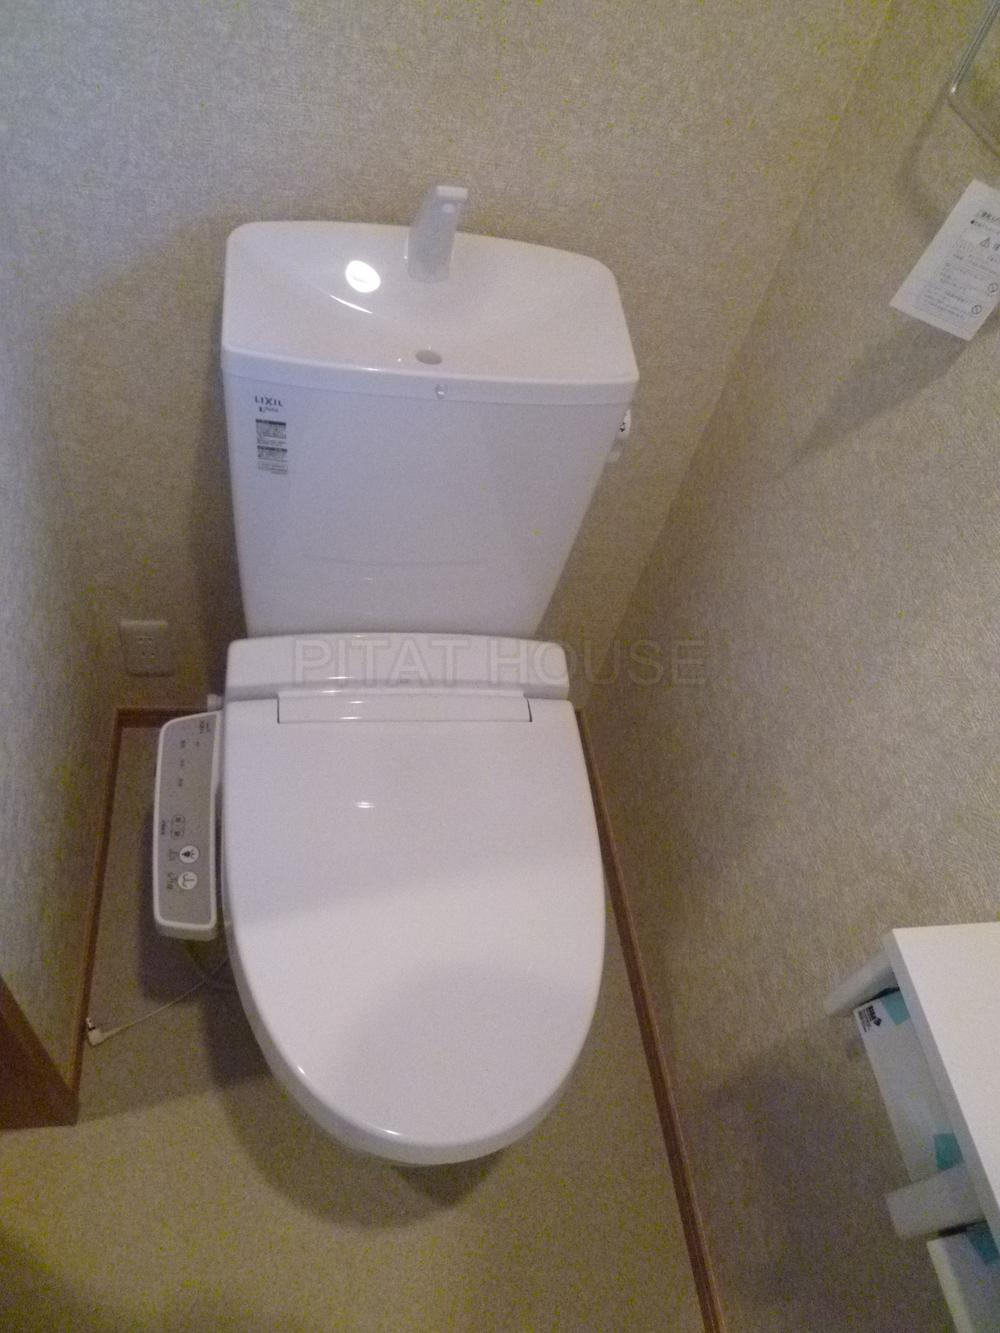 Toilet.  ◆ Toilet is with a bidet.